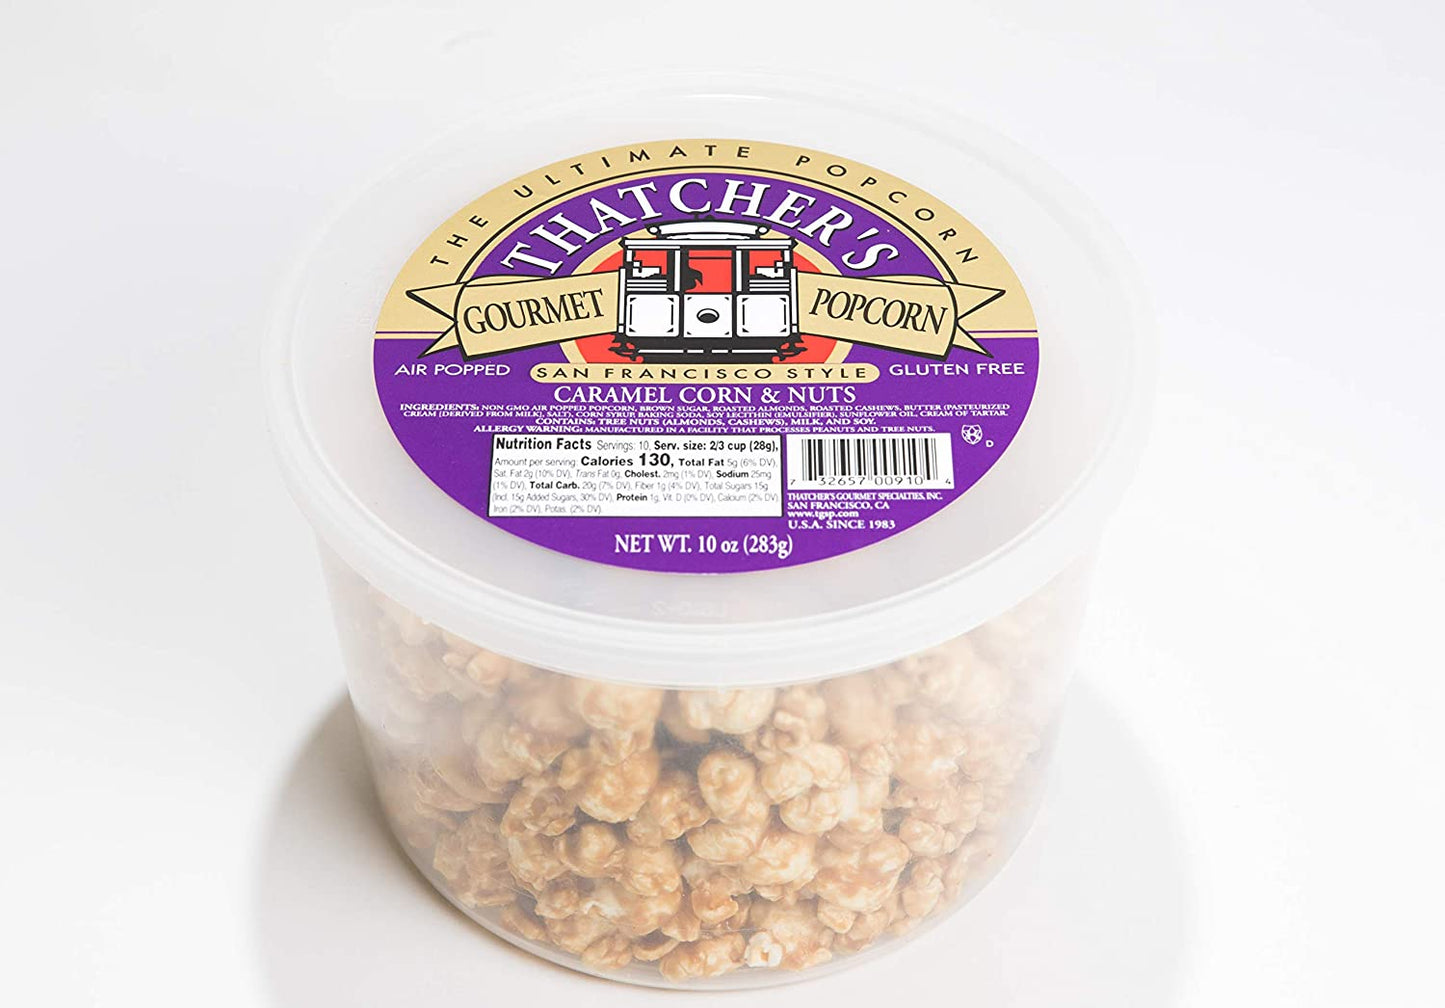 Thatcher's Gourmet Specialties Popcorn, Caramel Corn and Nuts, Gluten Free 10-Ounce (pack of 12)